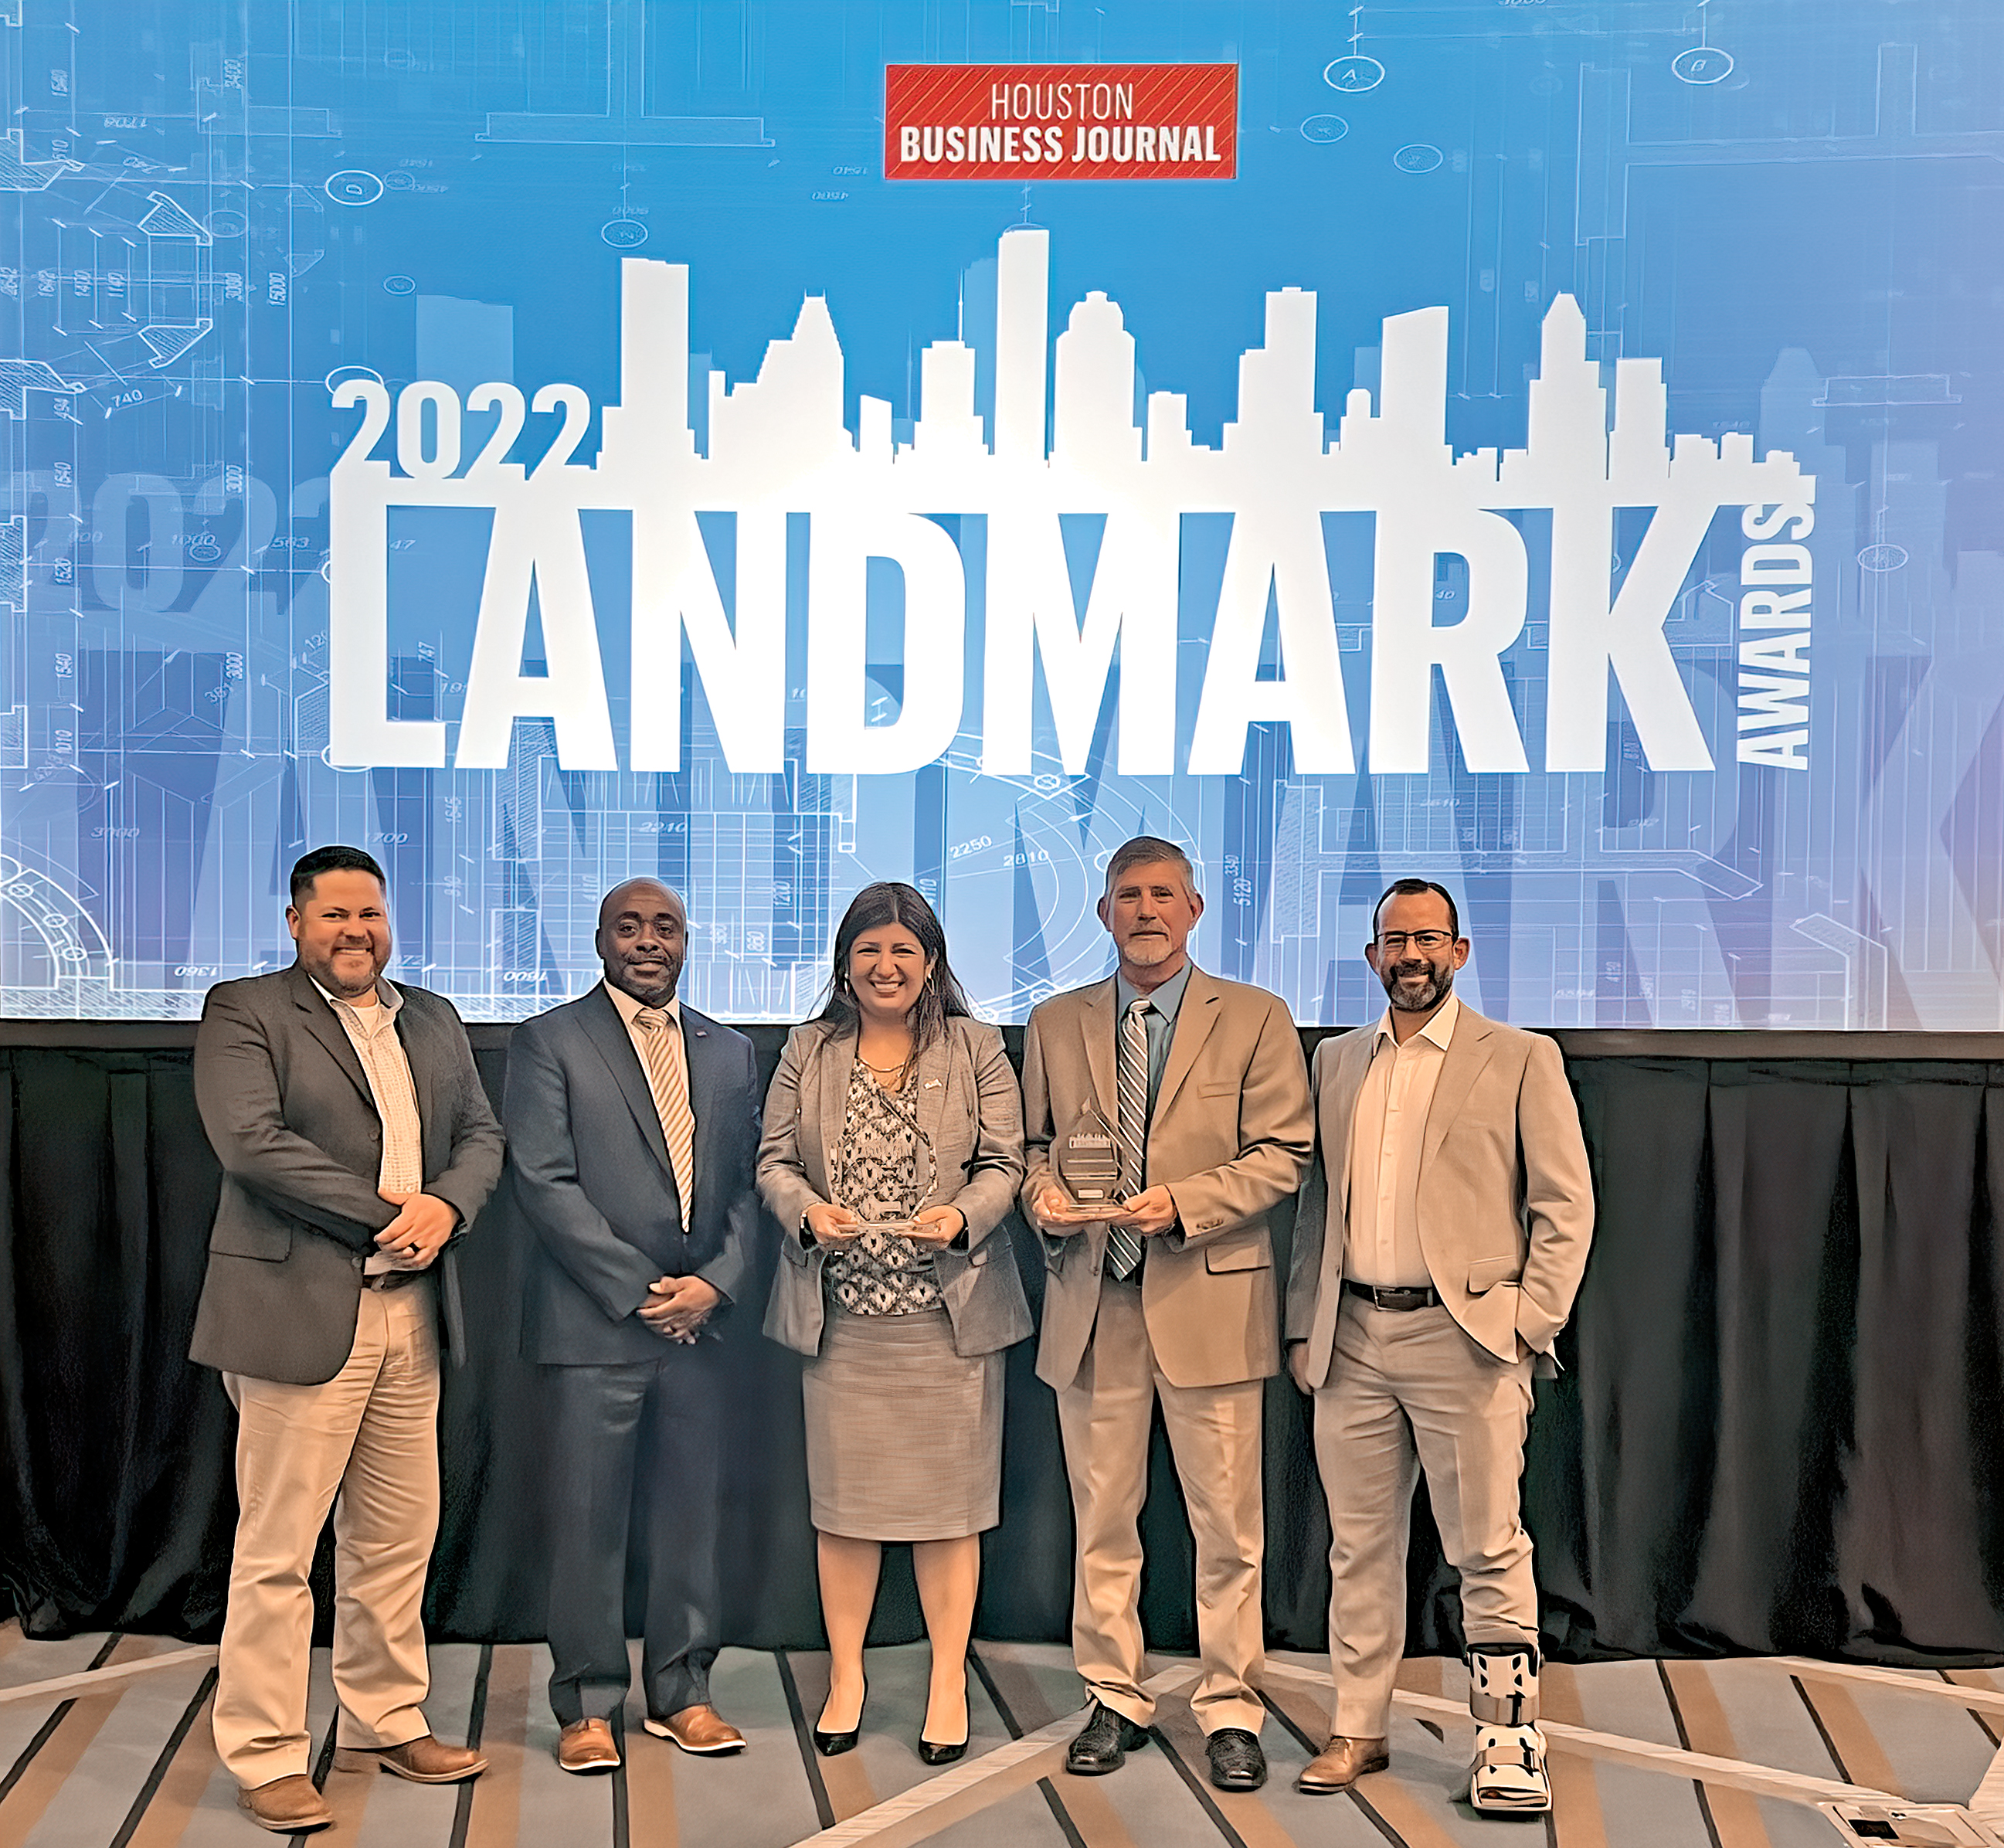 Accepting the 2022 Houston Business Journal Landmark Award for the Ruby Fuller Education Annex at Lamar State College Port Arthur are, from left, Justin Bailey, Project Manager, O’Donnell Snider Construction; Marcus Swayzer, Project Manager, Hill International, Inc.; Maria Garcia, Purchasing Director, LSCPA; Reed Richard, Physical Plant Director, LSCPA; and David Payne, Principal and Vice President, O’Donnell Snider Construction.